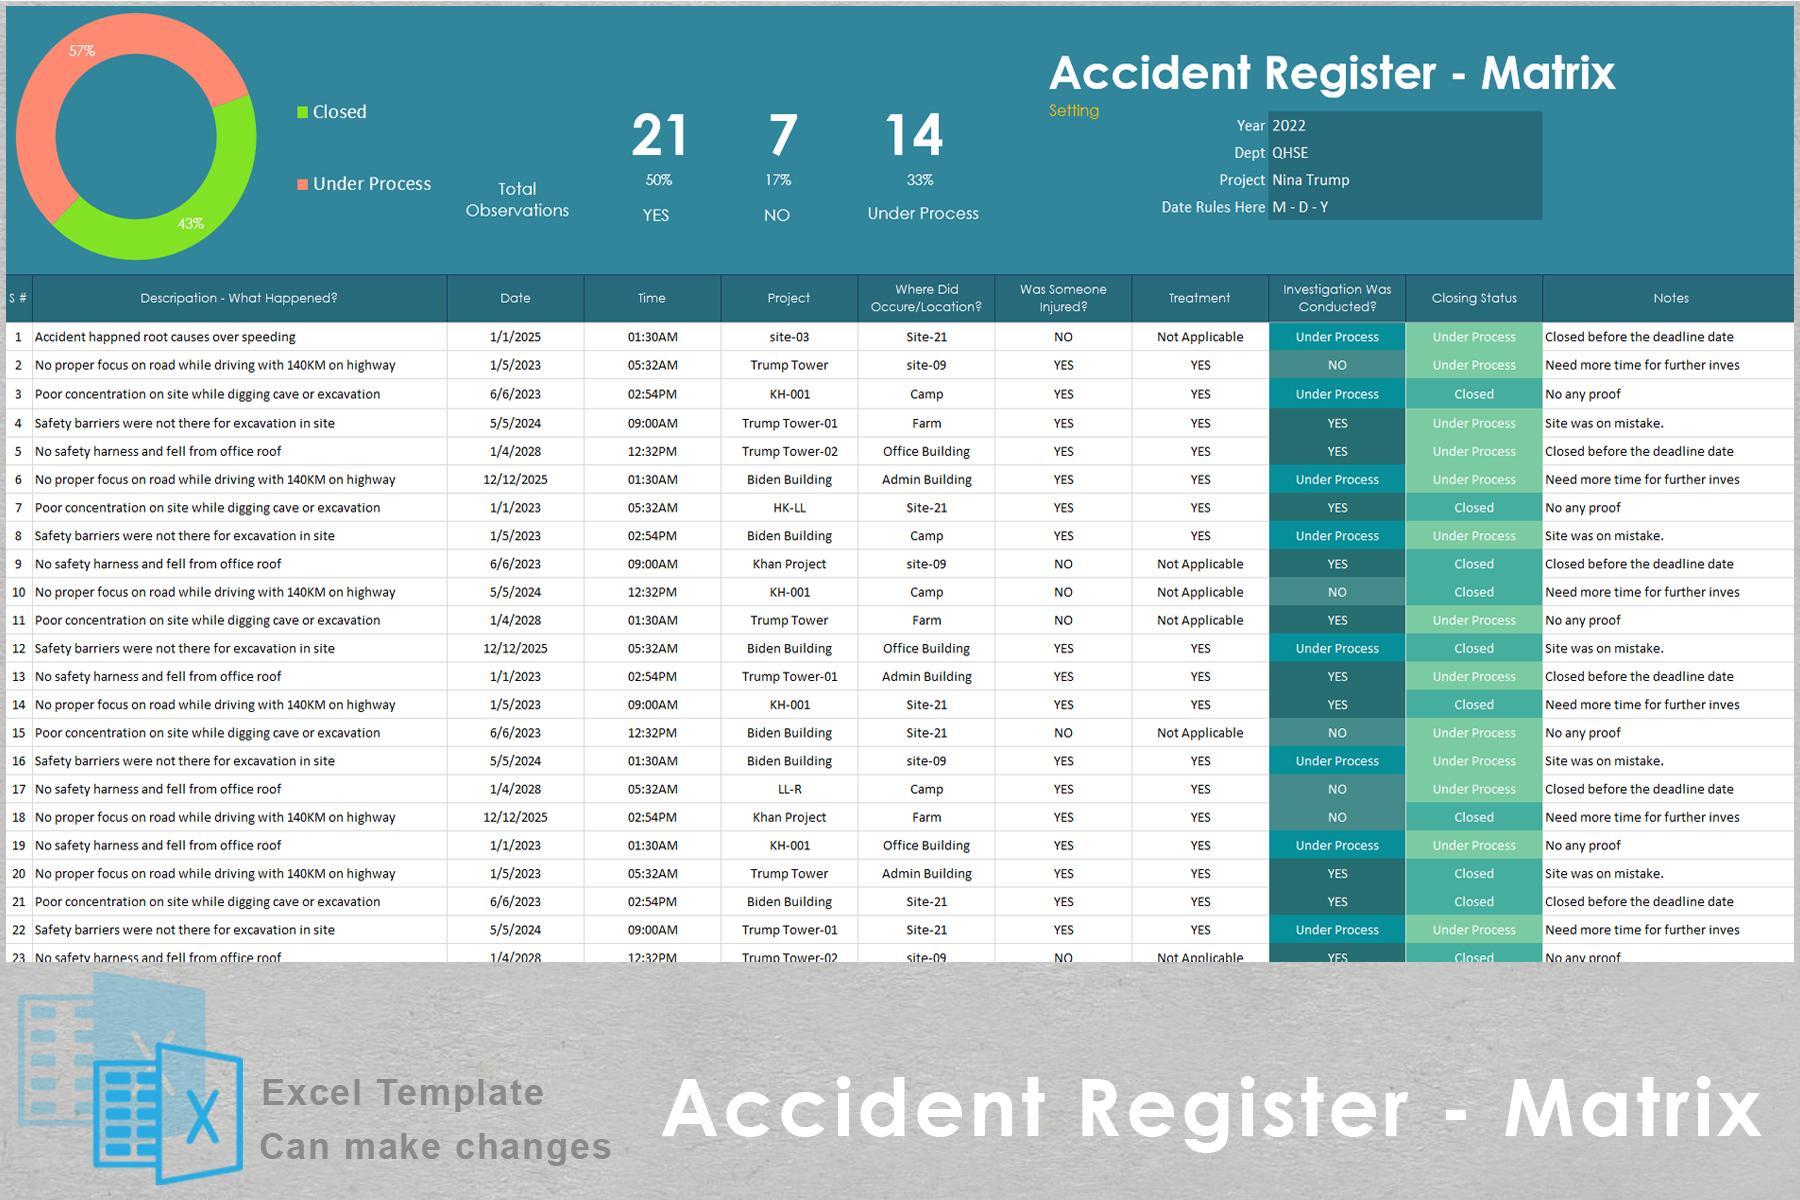 Accident Register- Accident Tracking Matrix Template